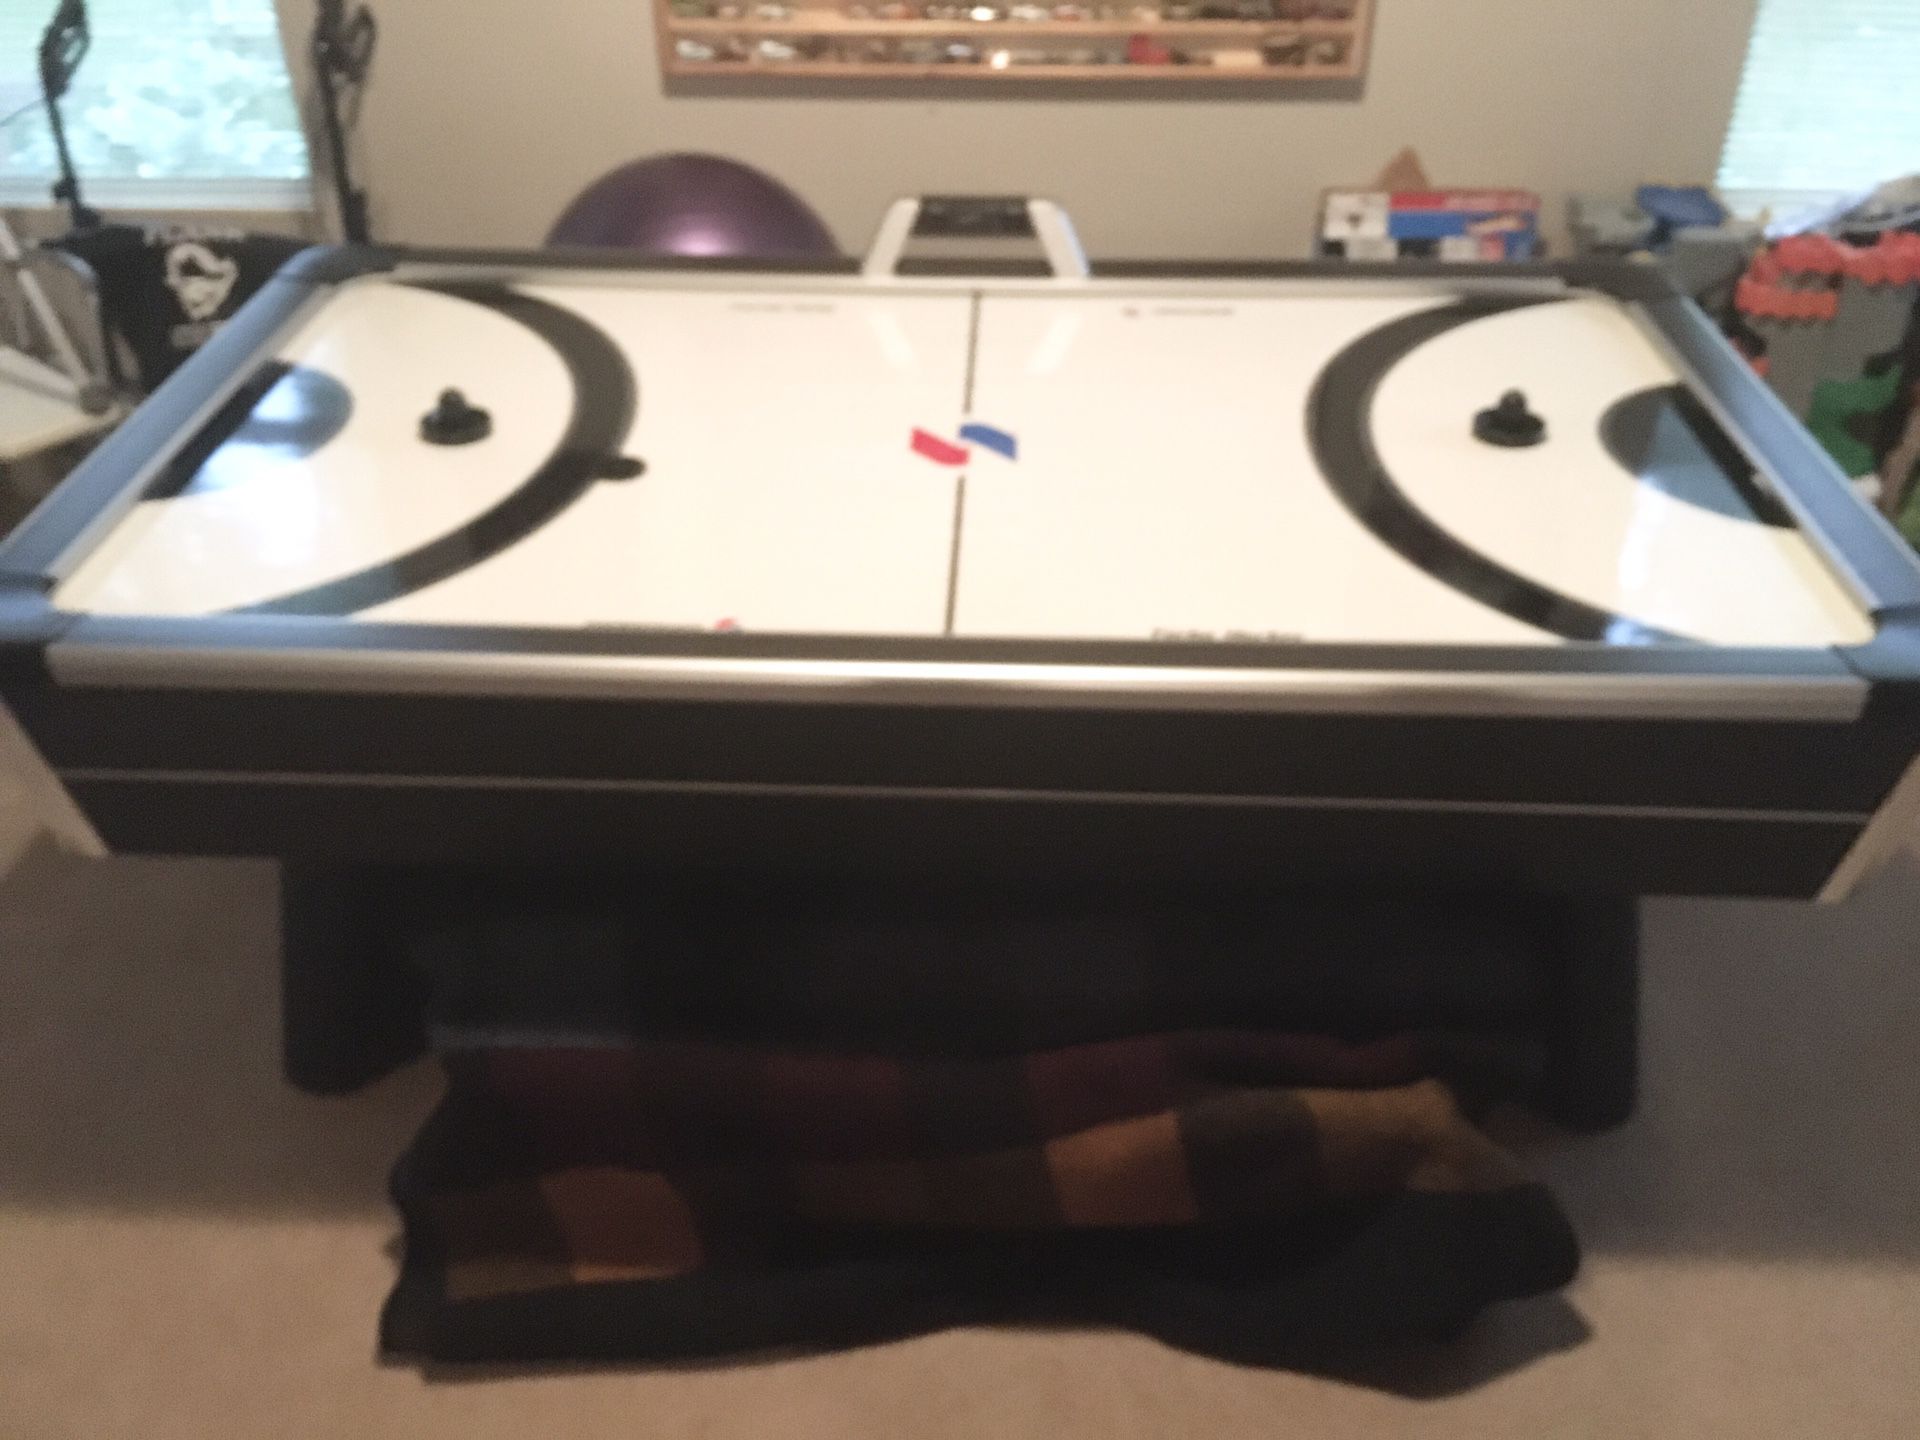 Sportcraft Turbo Air Hockey table with lights and sounds, 48”W x 84”L x 30”H